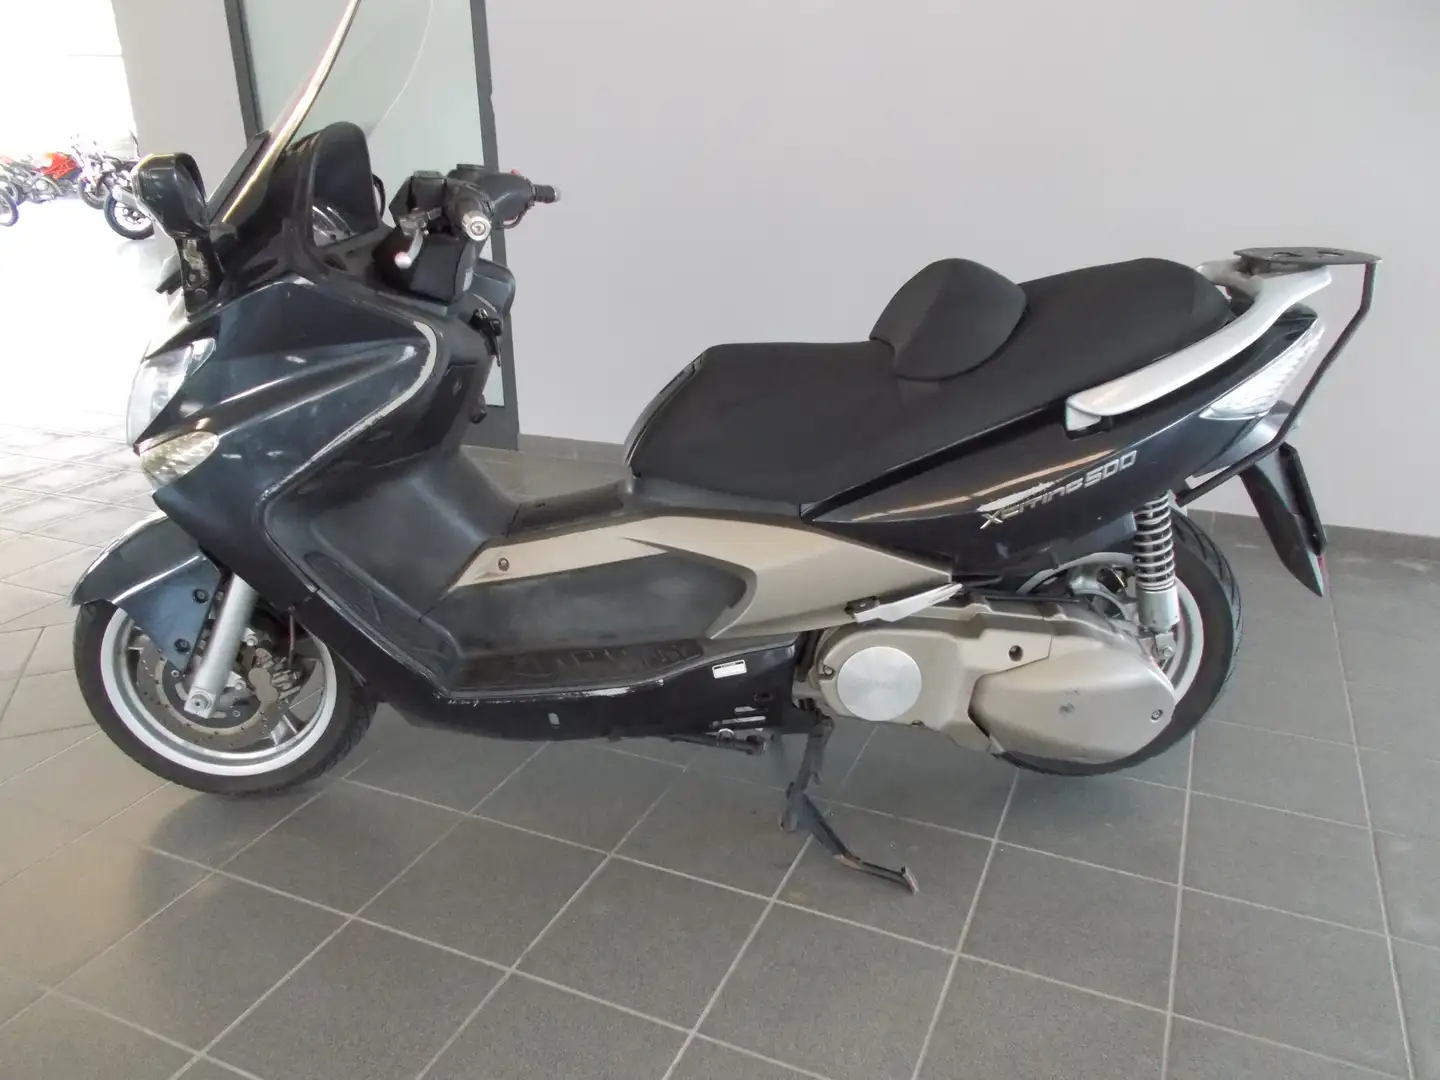 usato Kymco Xciting 500i Scooter a Alba - Cuneo - Cn per € 1.500,-